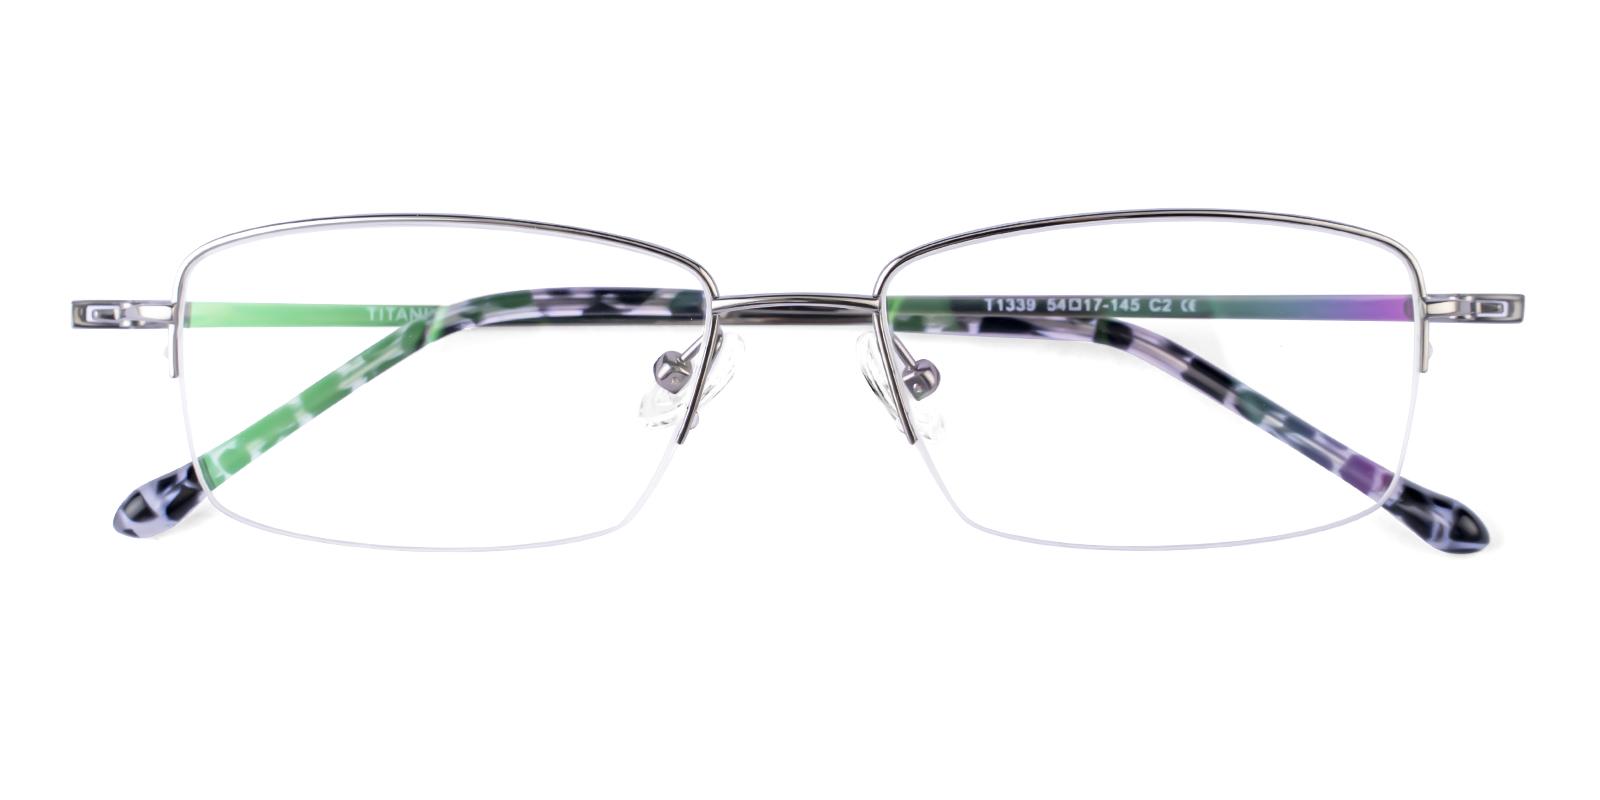 Absel Silver Titanium Eyeglasses , NosePads Frames from ABBE Glasses